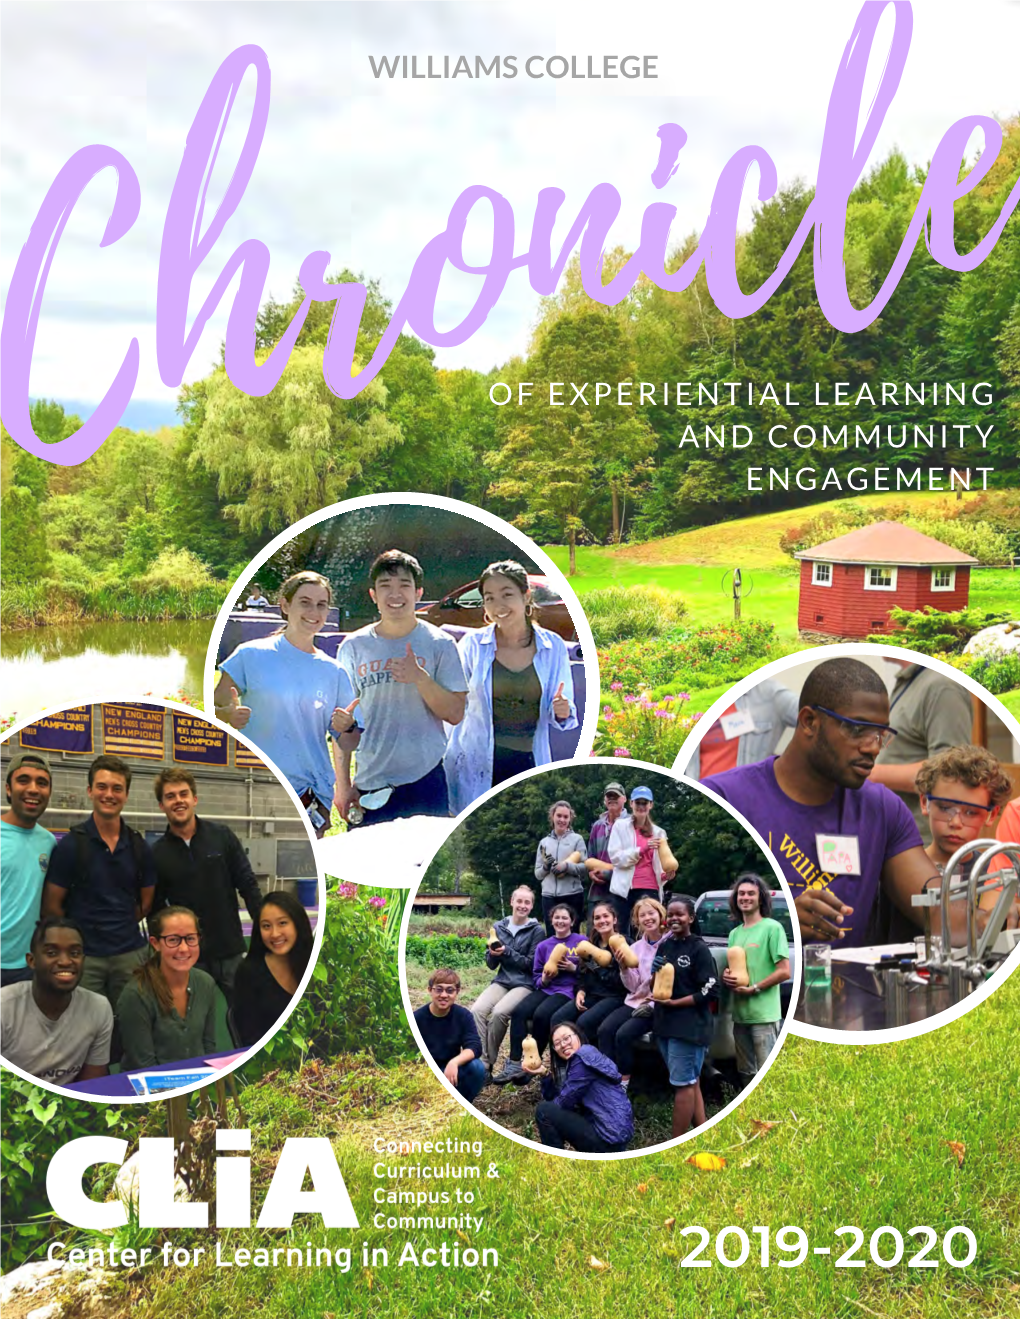 Of Experiential Learning and Community Engagement